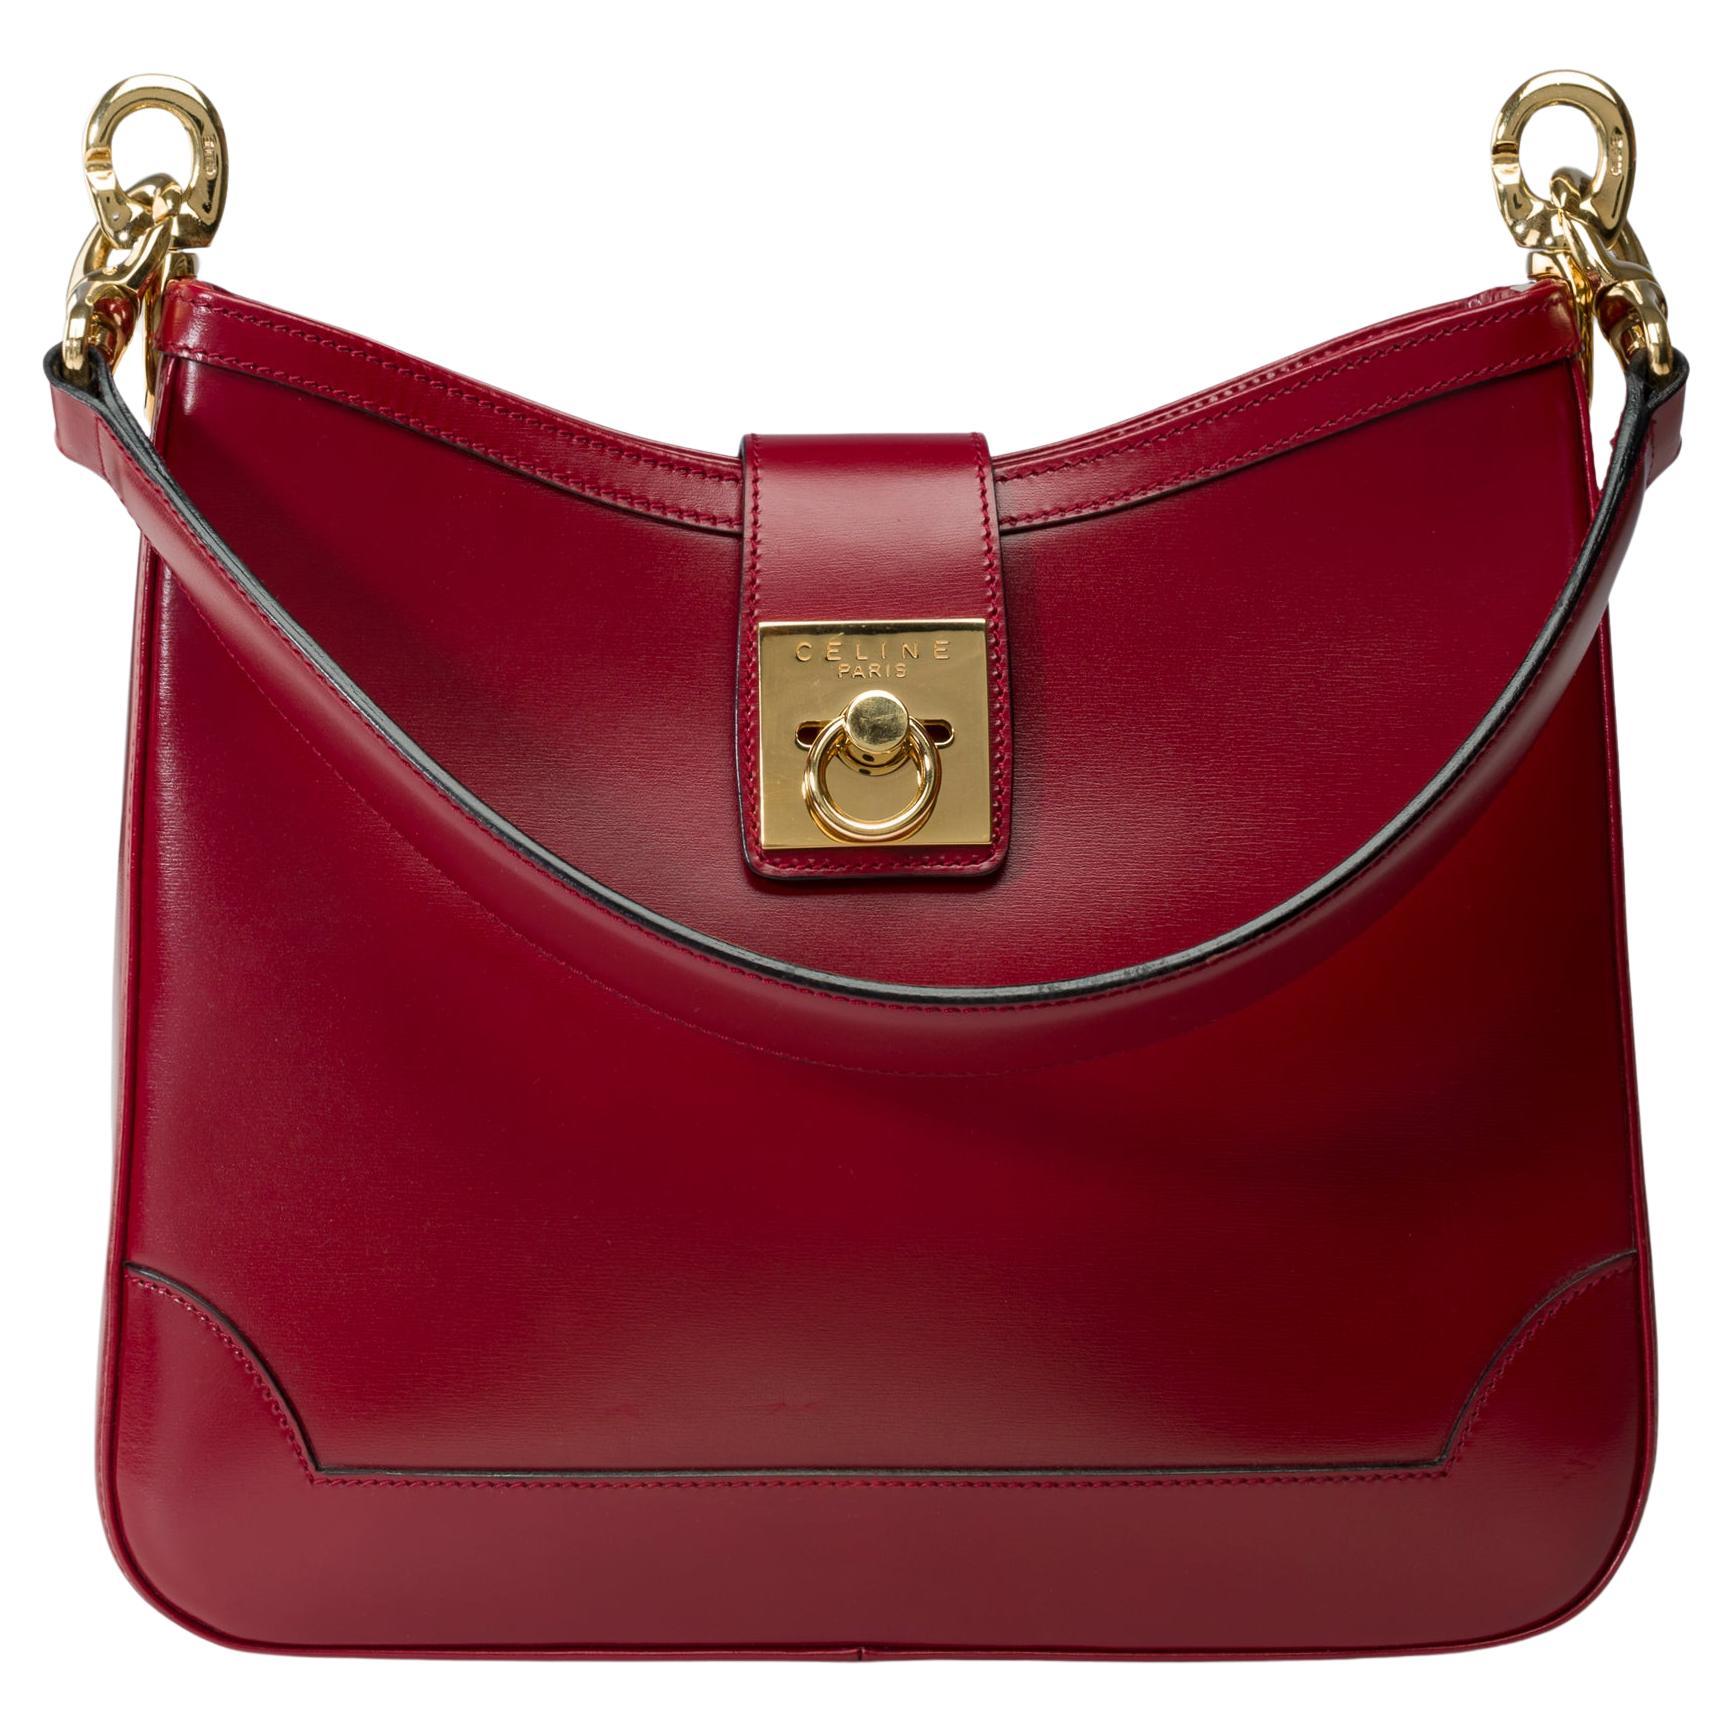 Gorgeous Celine vintage Tote bag in red cherry box calf, GHW For Sale